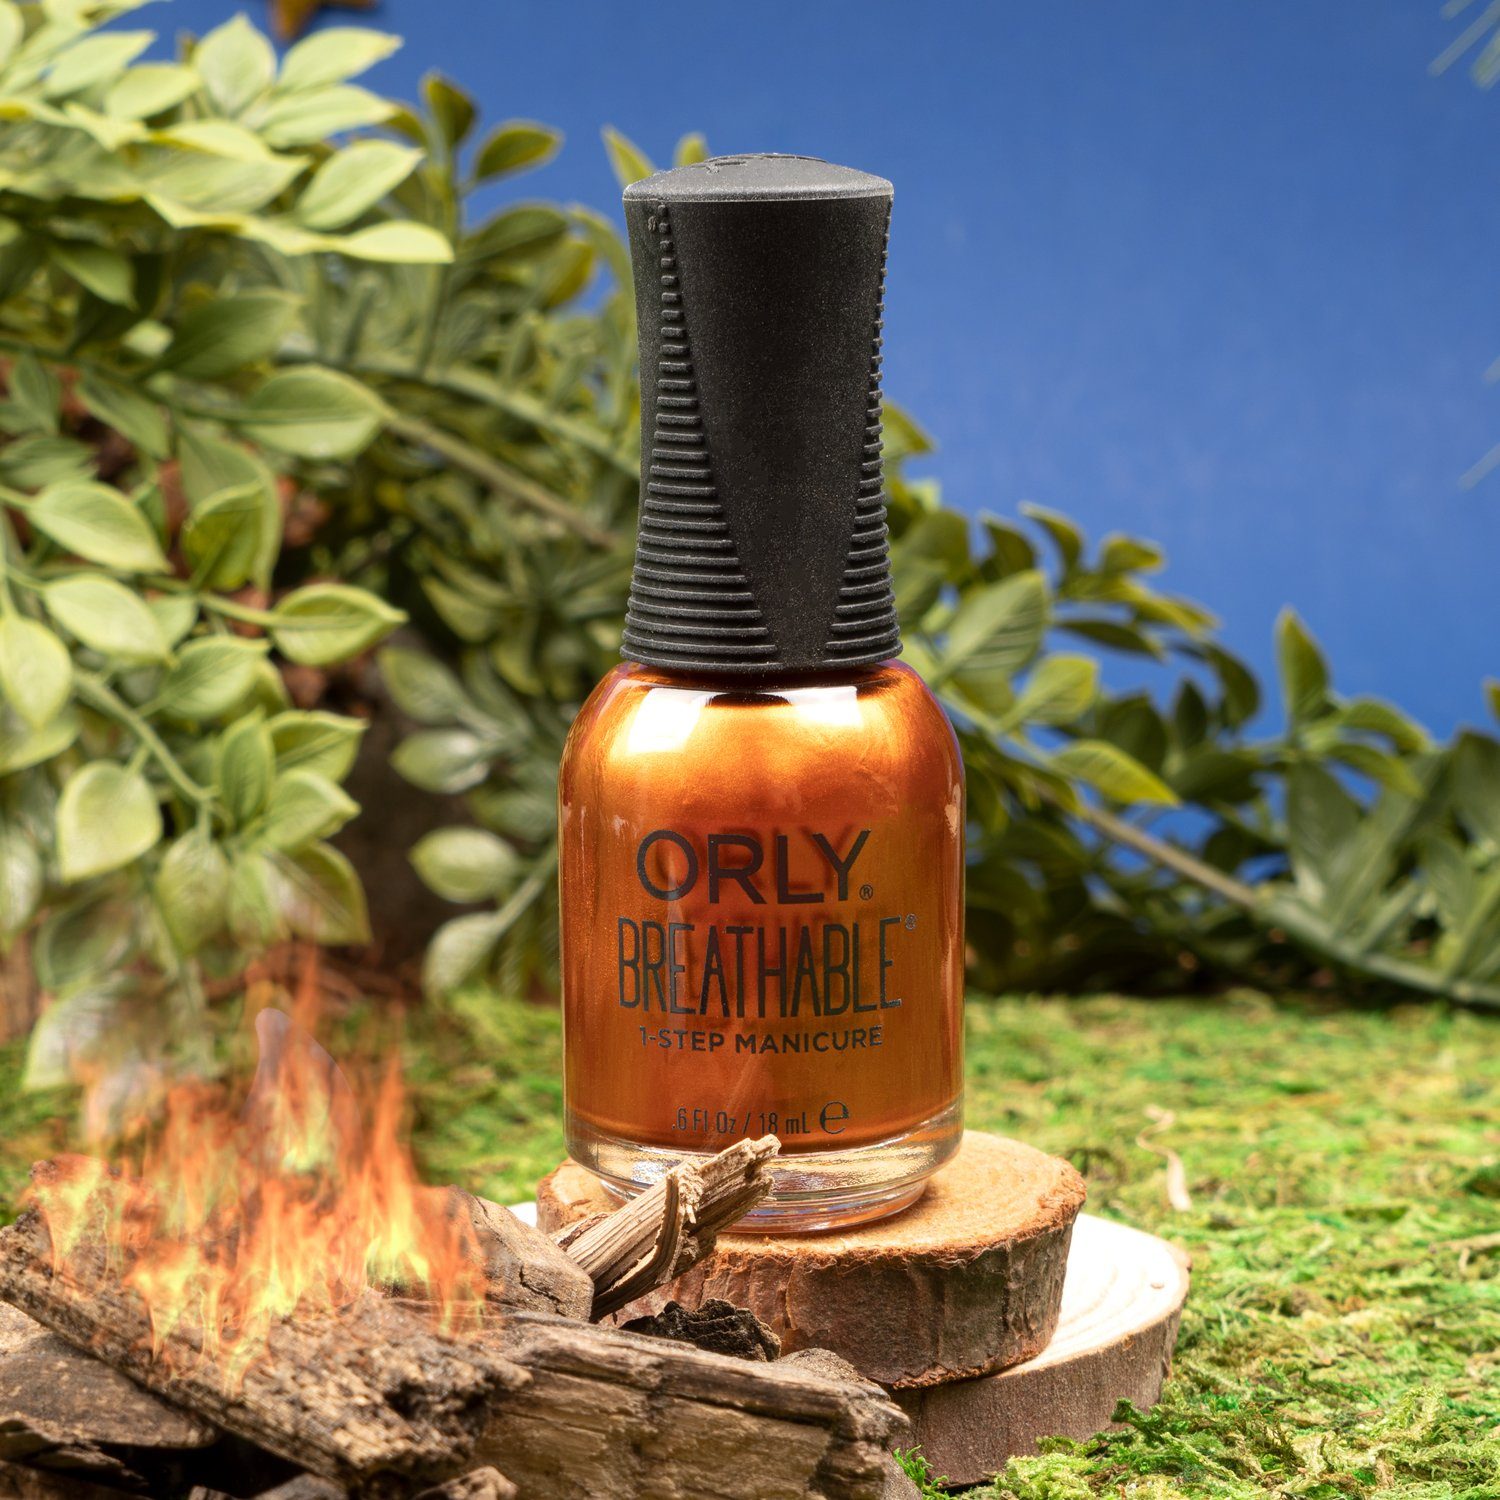 ML Nagellack (Camp)Fire, Light 18 ORLY Breathable ORLY My